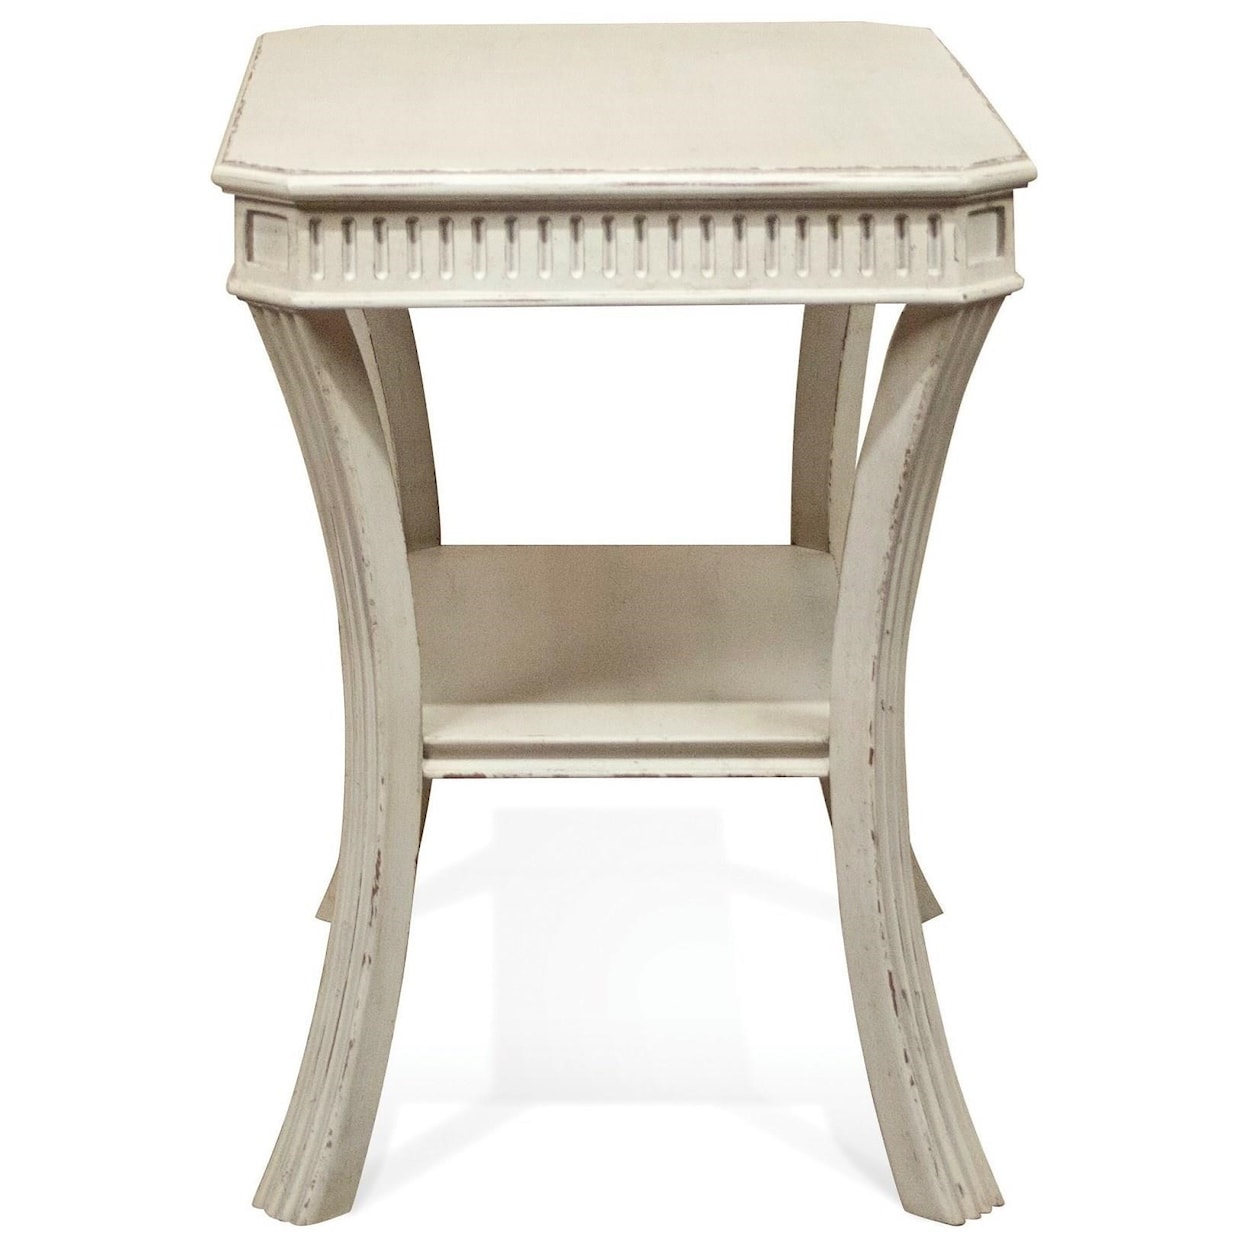 Riverside Furniture Huntleigh Rectangle Chairside Table